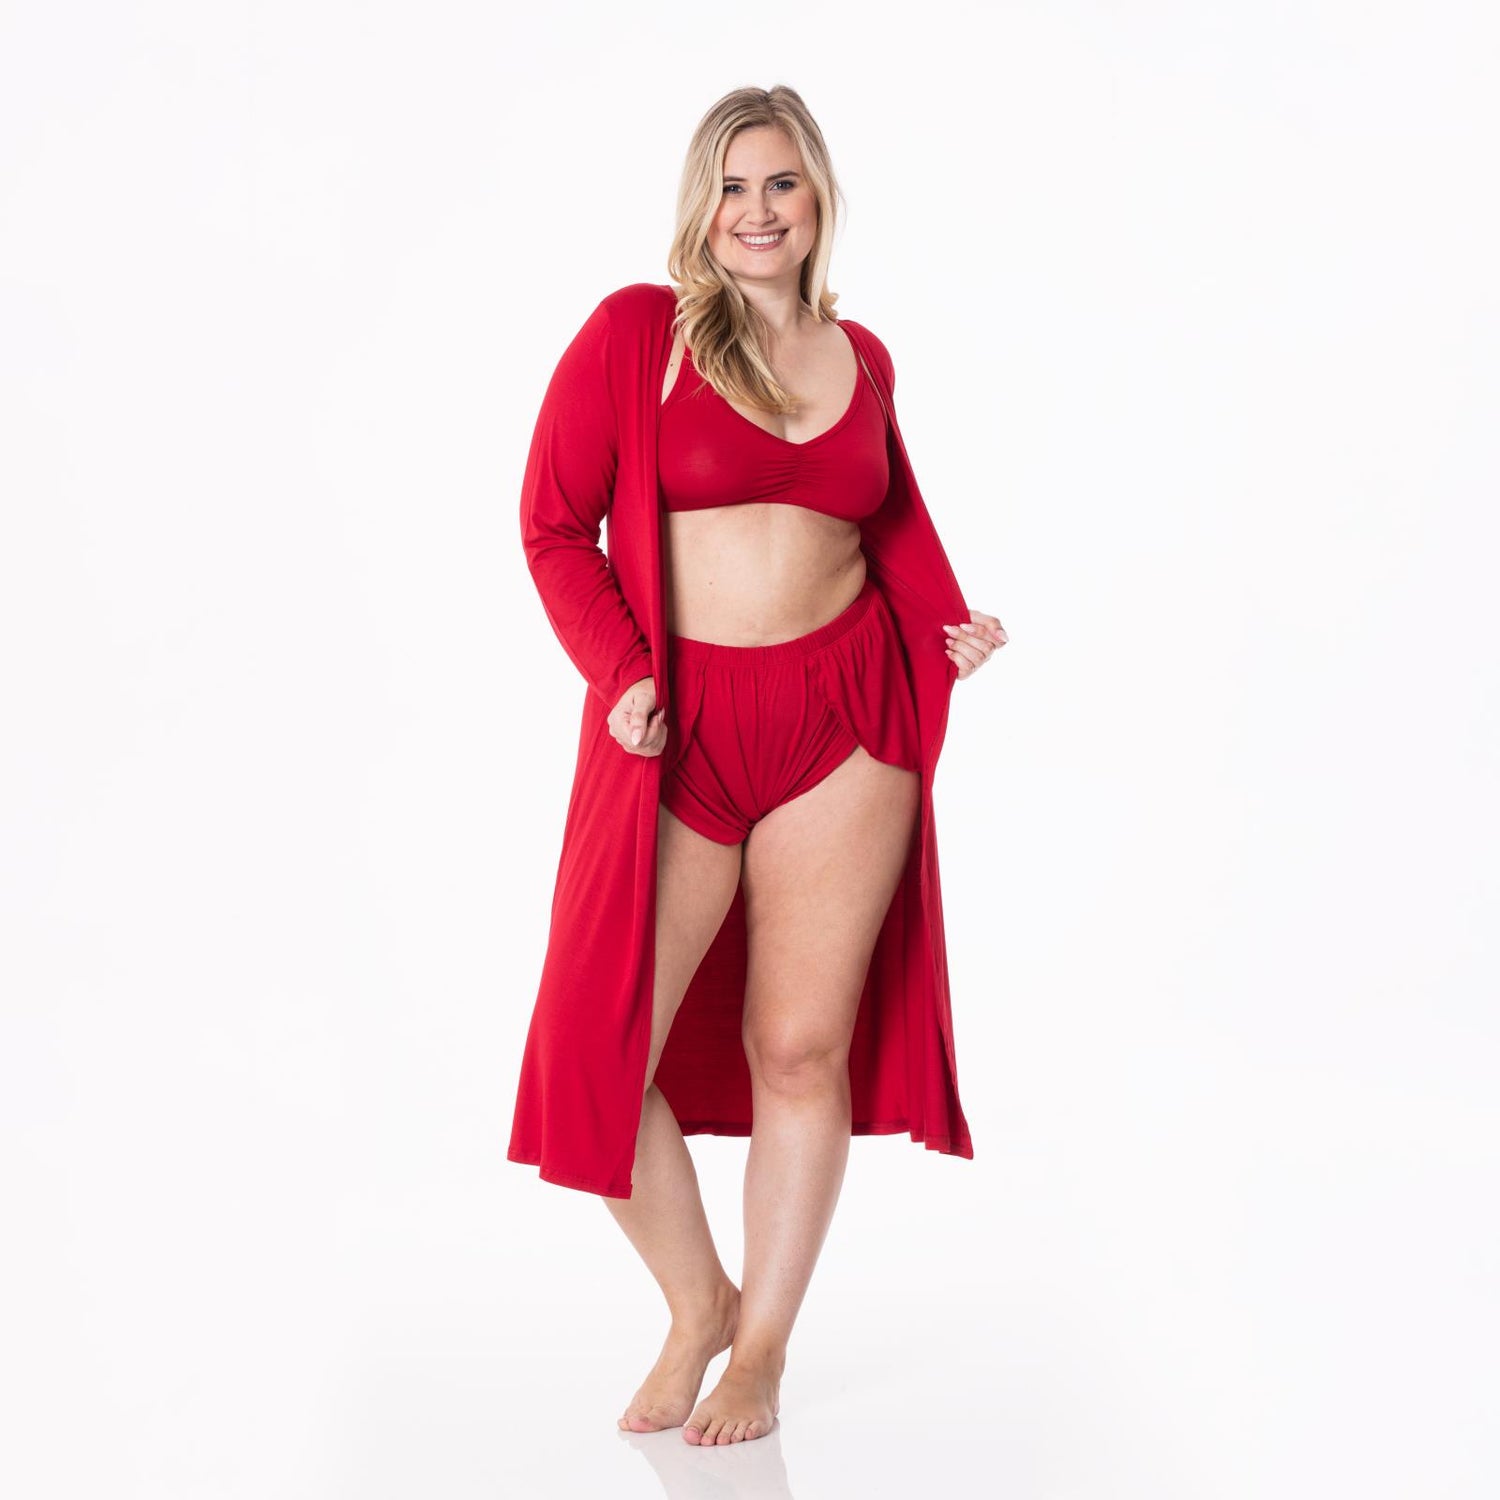 Women's Sleeping Bra, Tulip Shorts and Duster Robe Set in Candy Apple